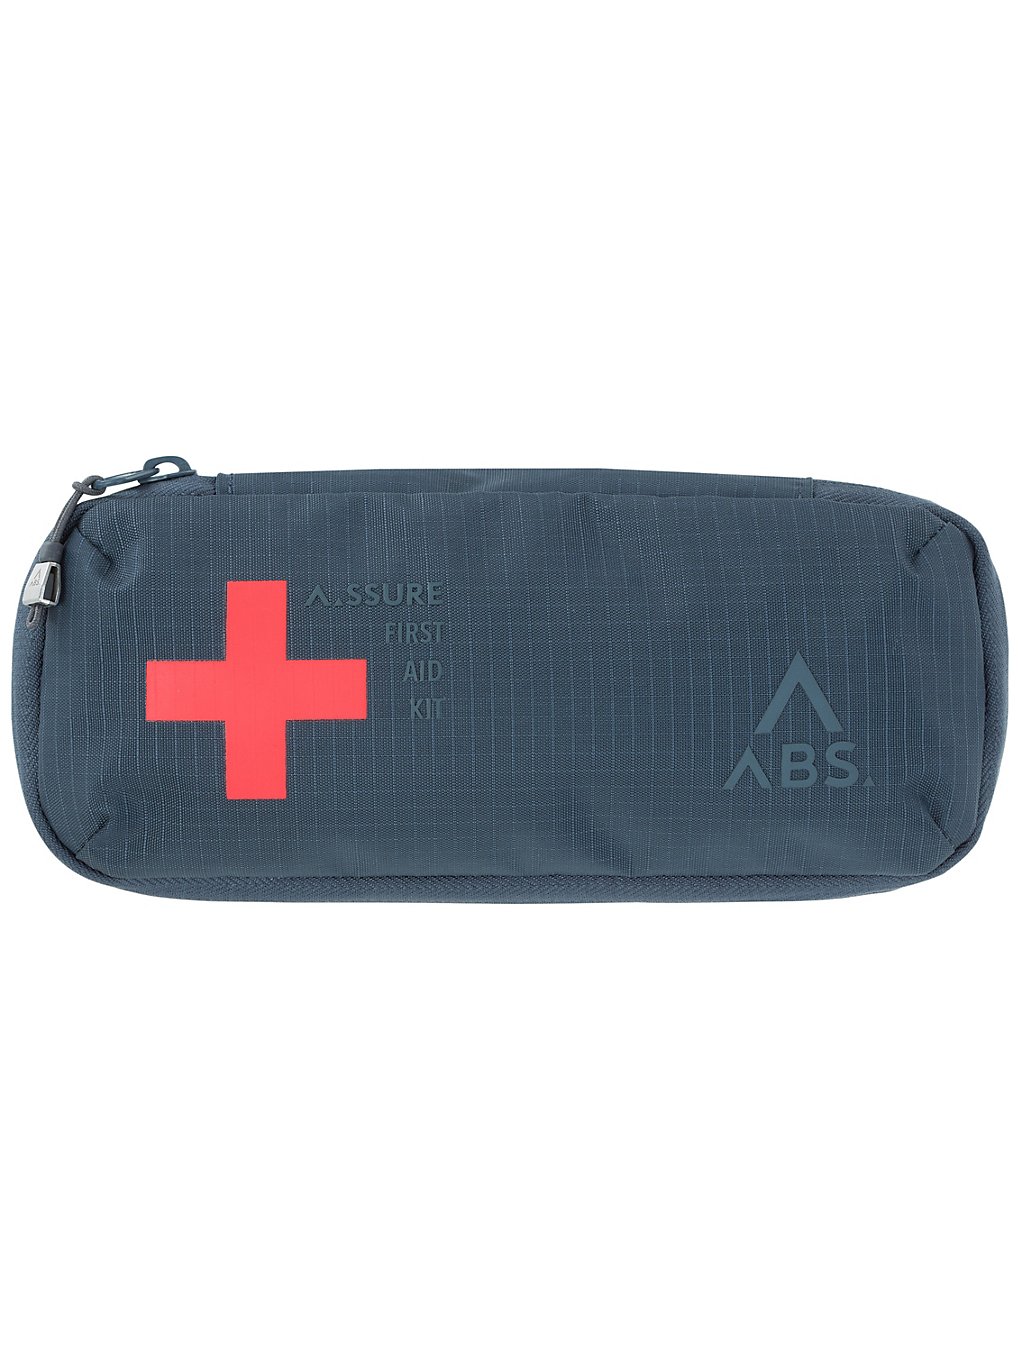 ABS First Aid Kit multicolor